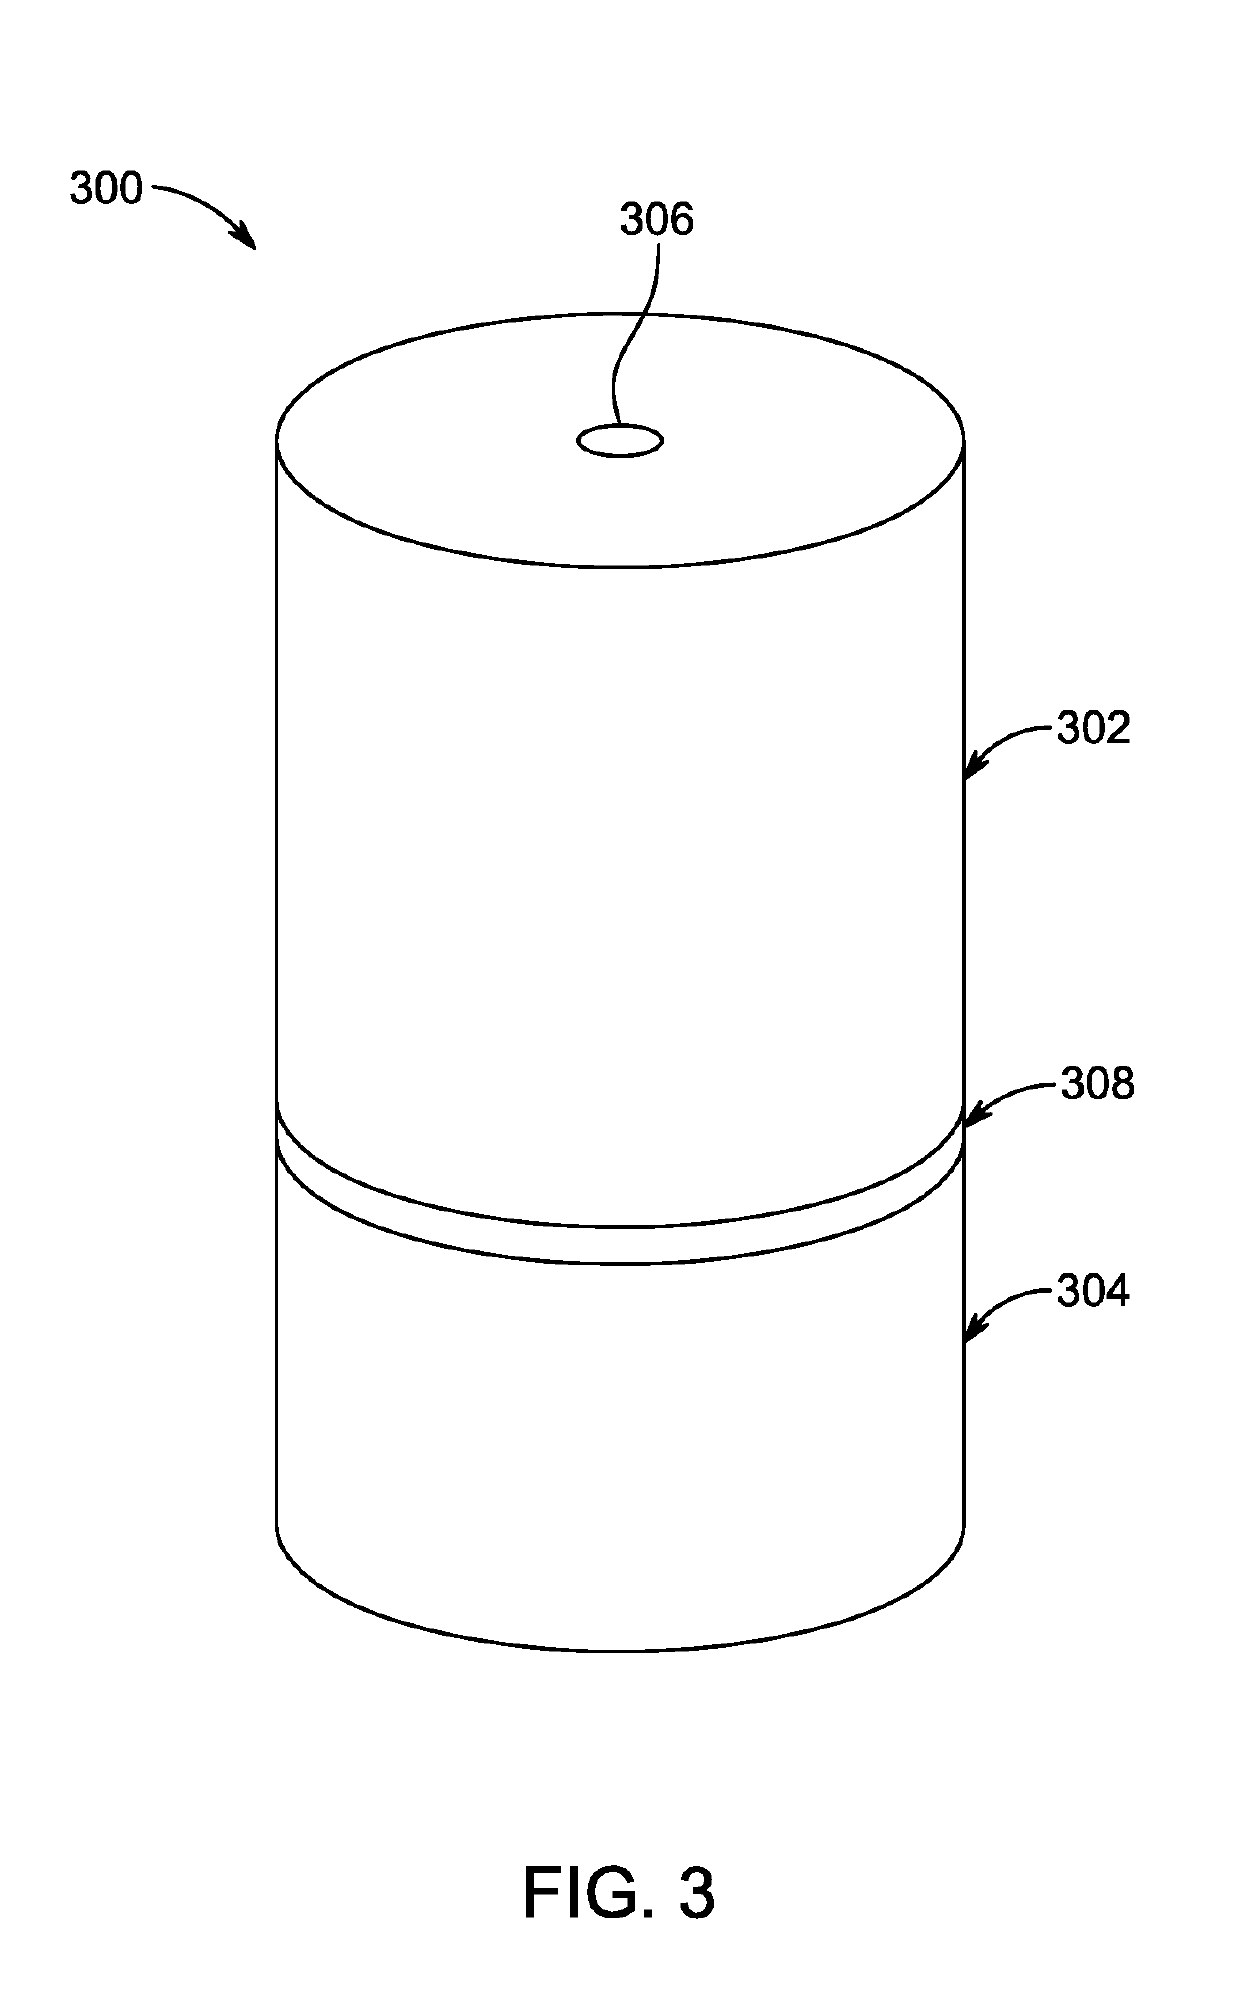 Medication disposal apparatus and methods of manufacture and use